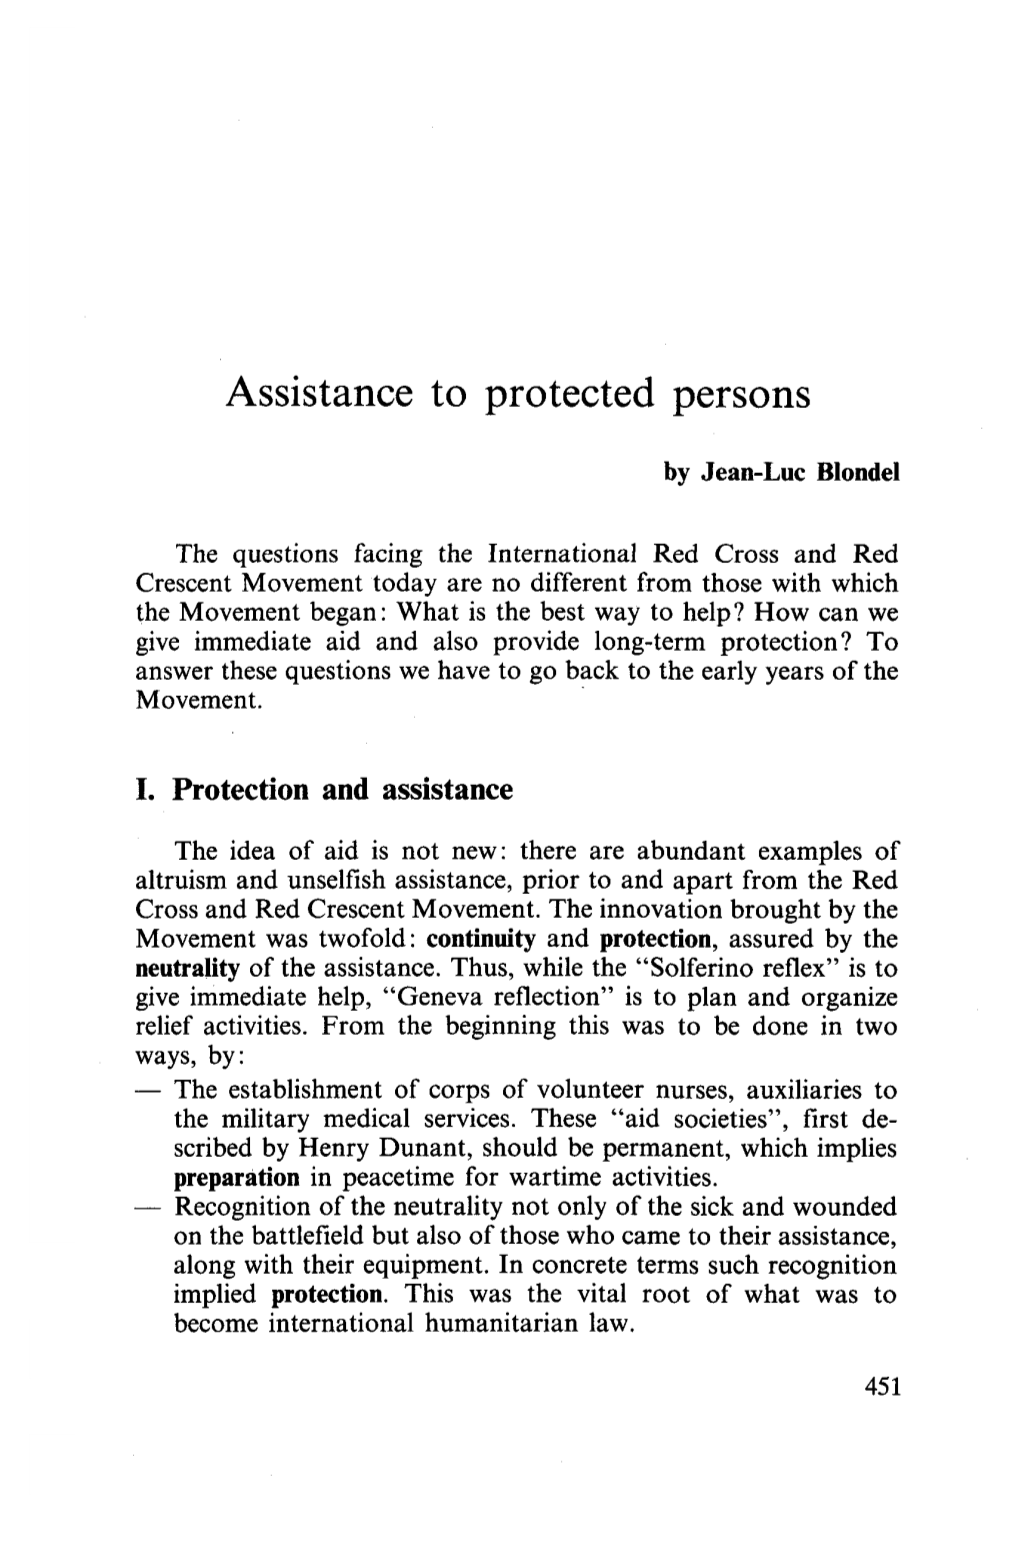 Assistance to Protected Persons